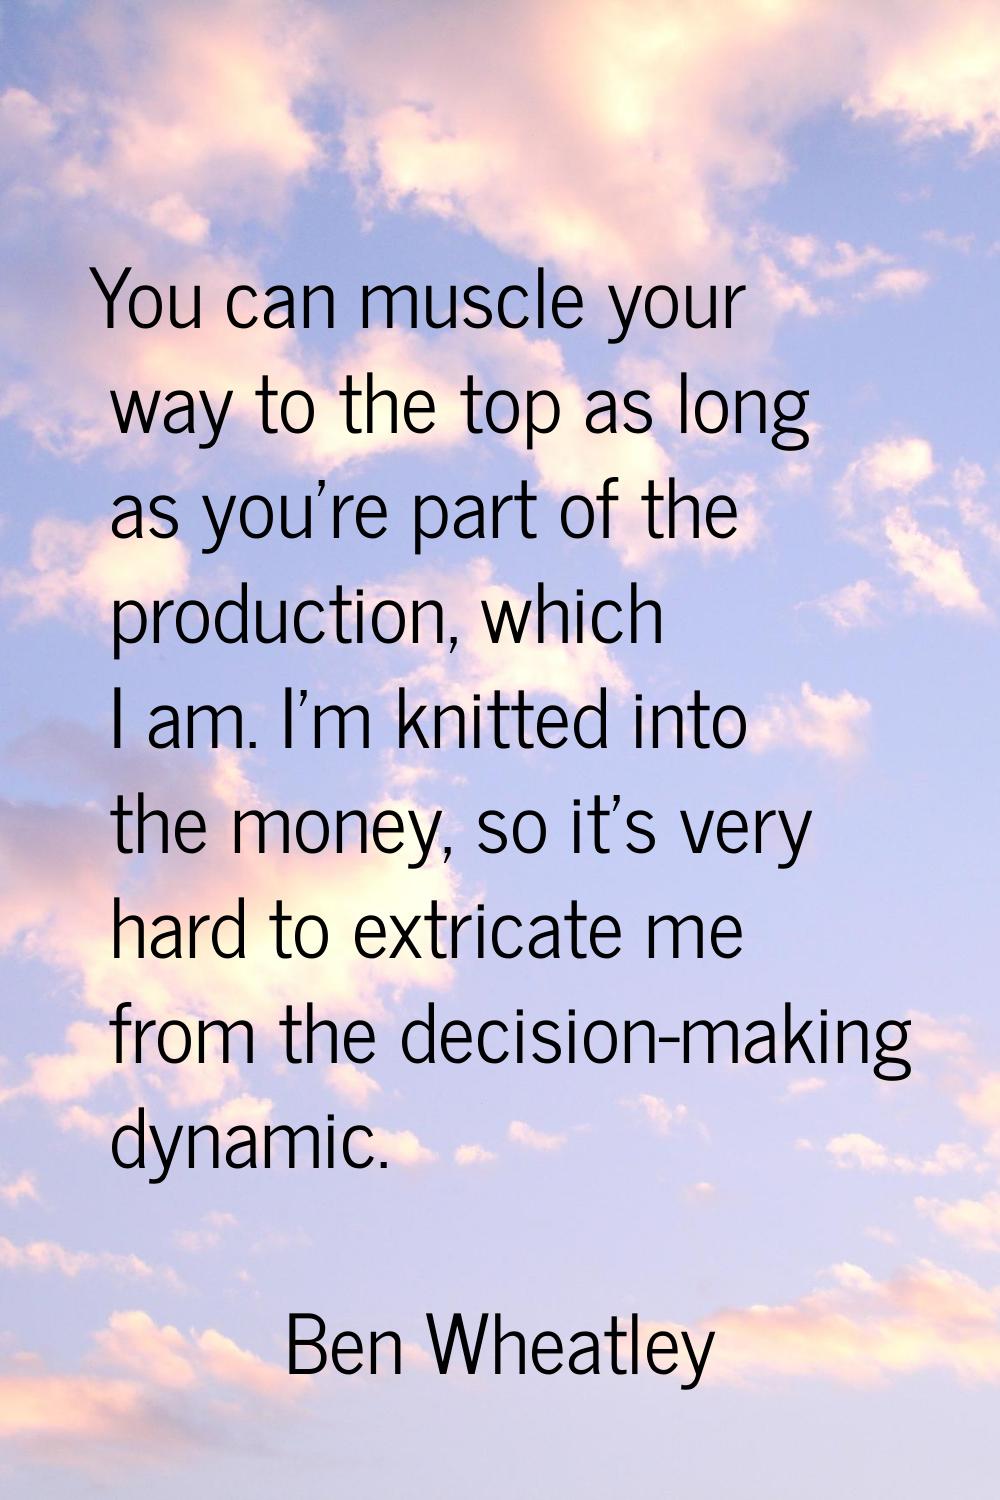 You can muscle your way to the top as long as you're part of the production, which I am. I'm knitte